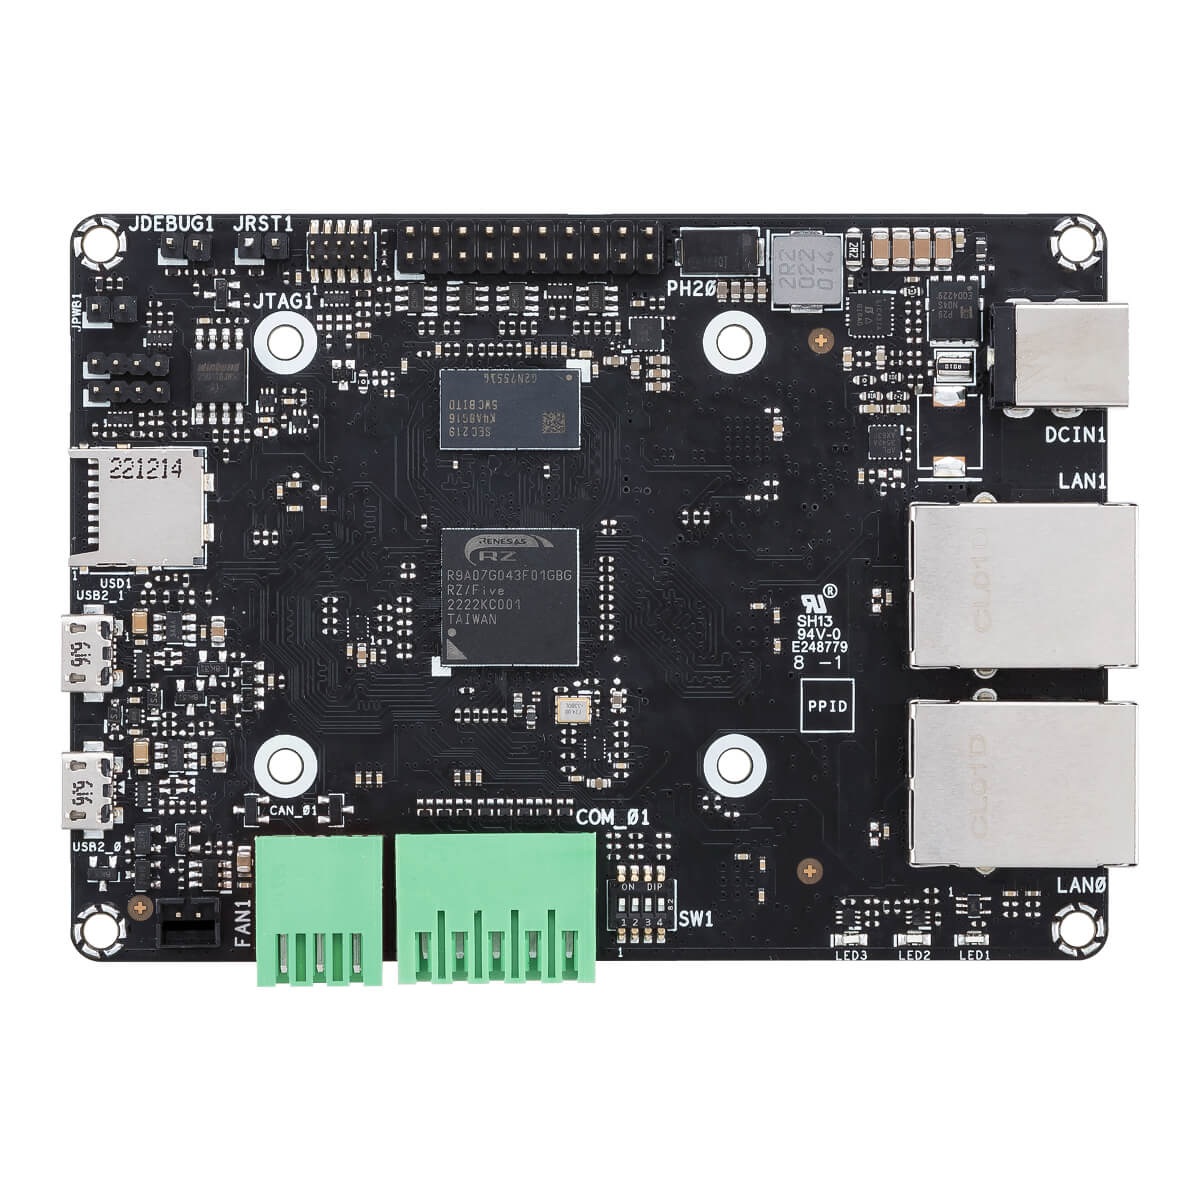 a top view of the asus iot tinker v board